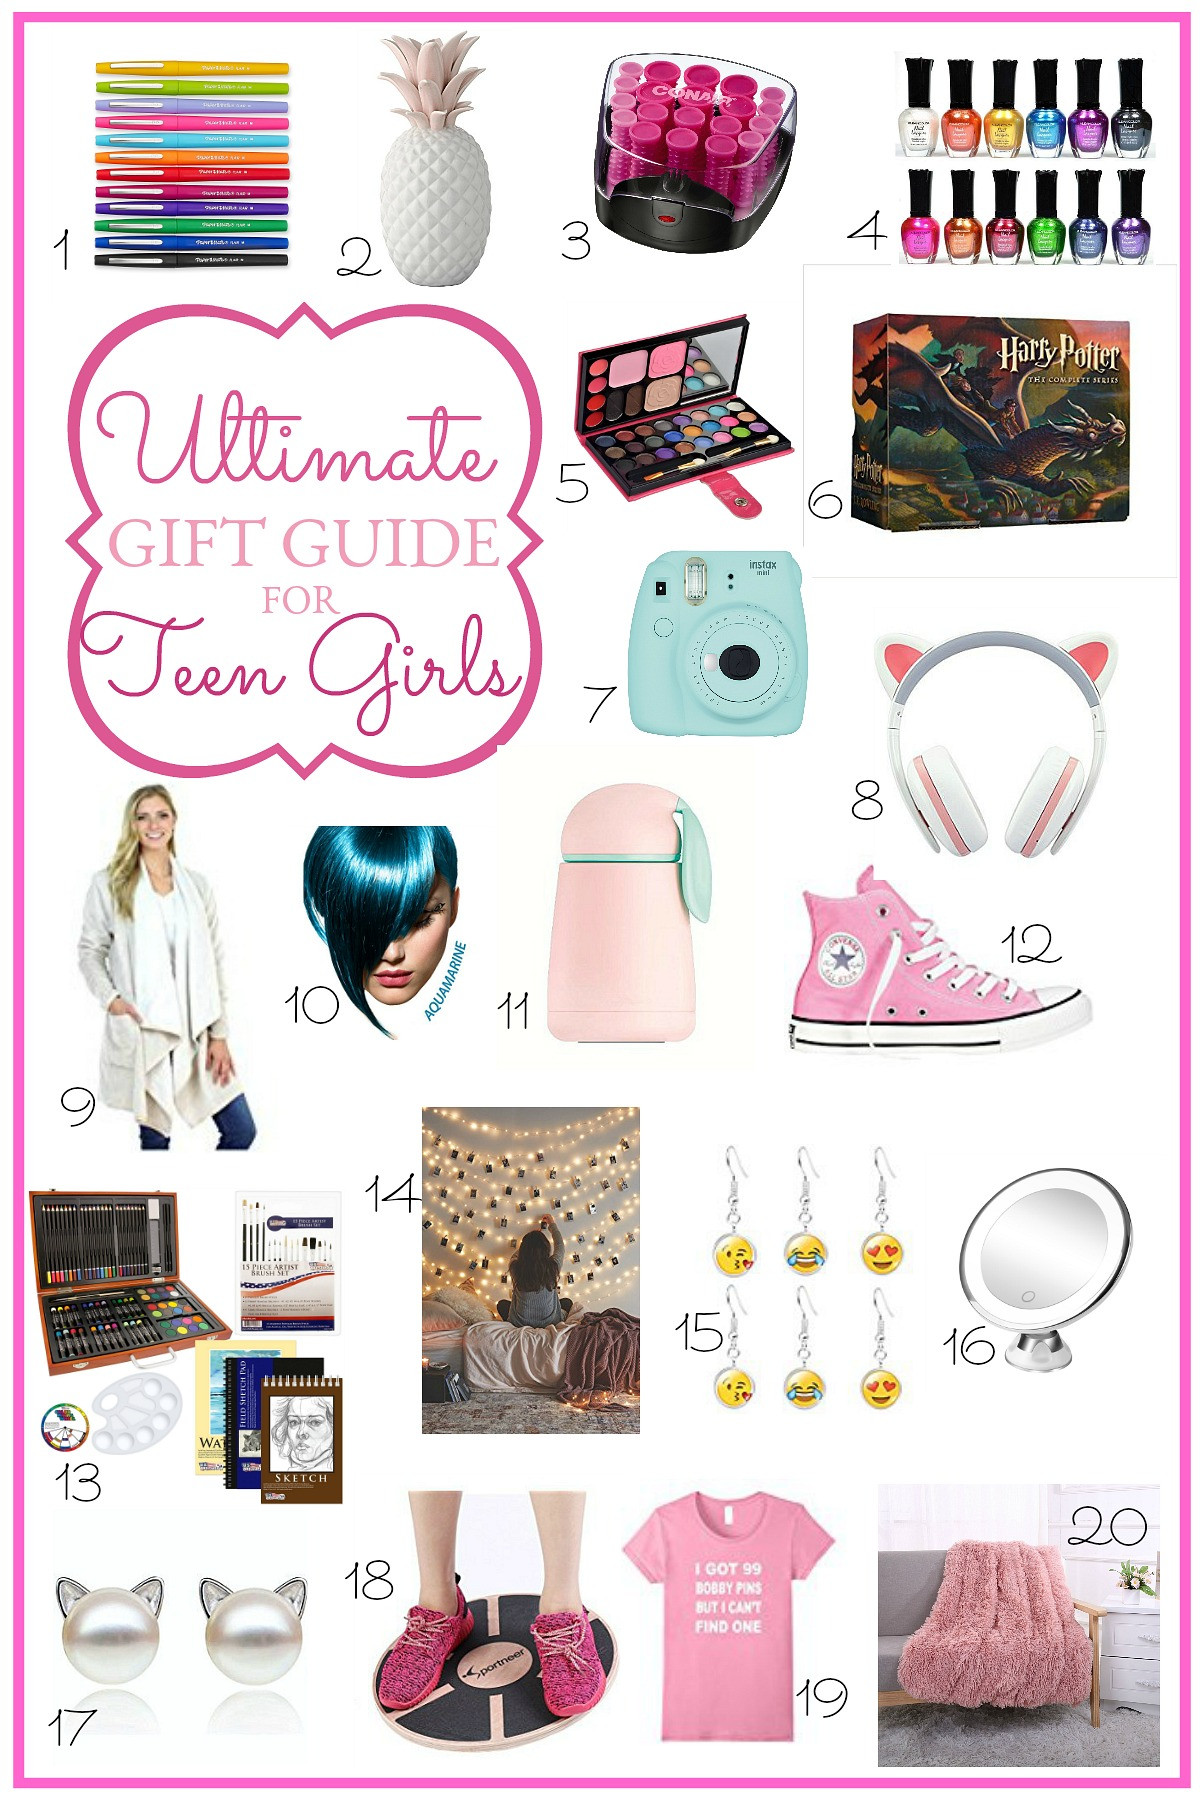 Gift Ideas For Young Girls
 Ultimate Holiday Gift Guide for Teen Girls